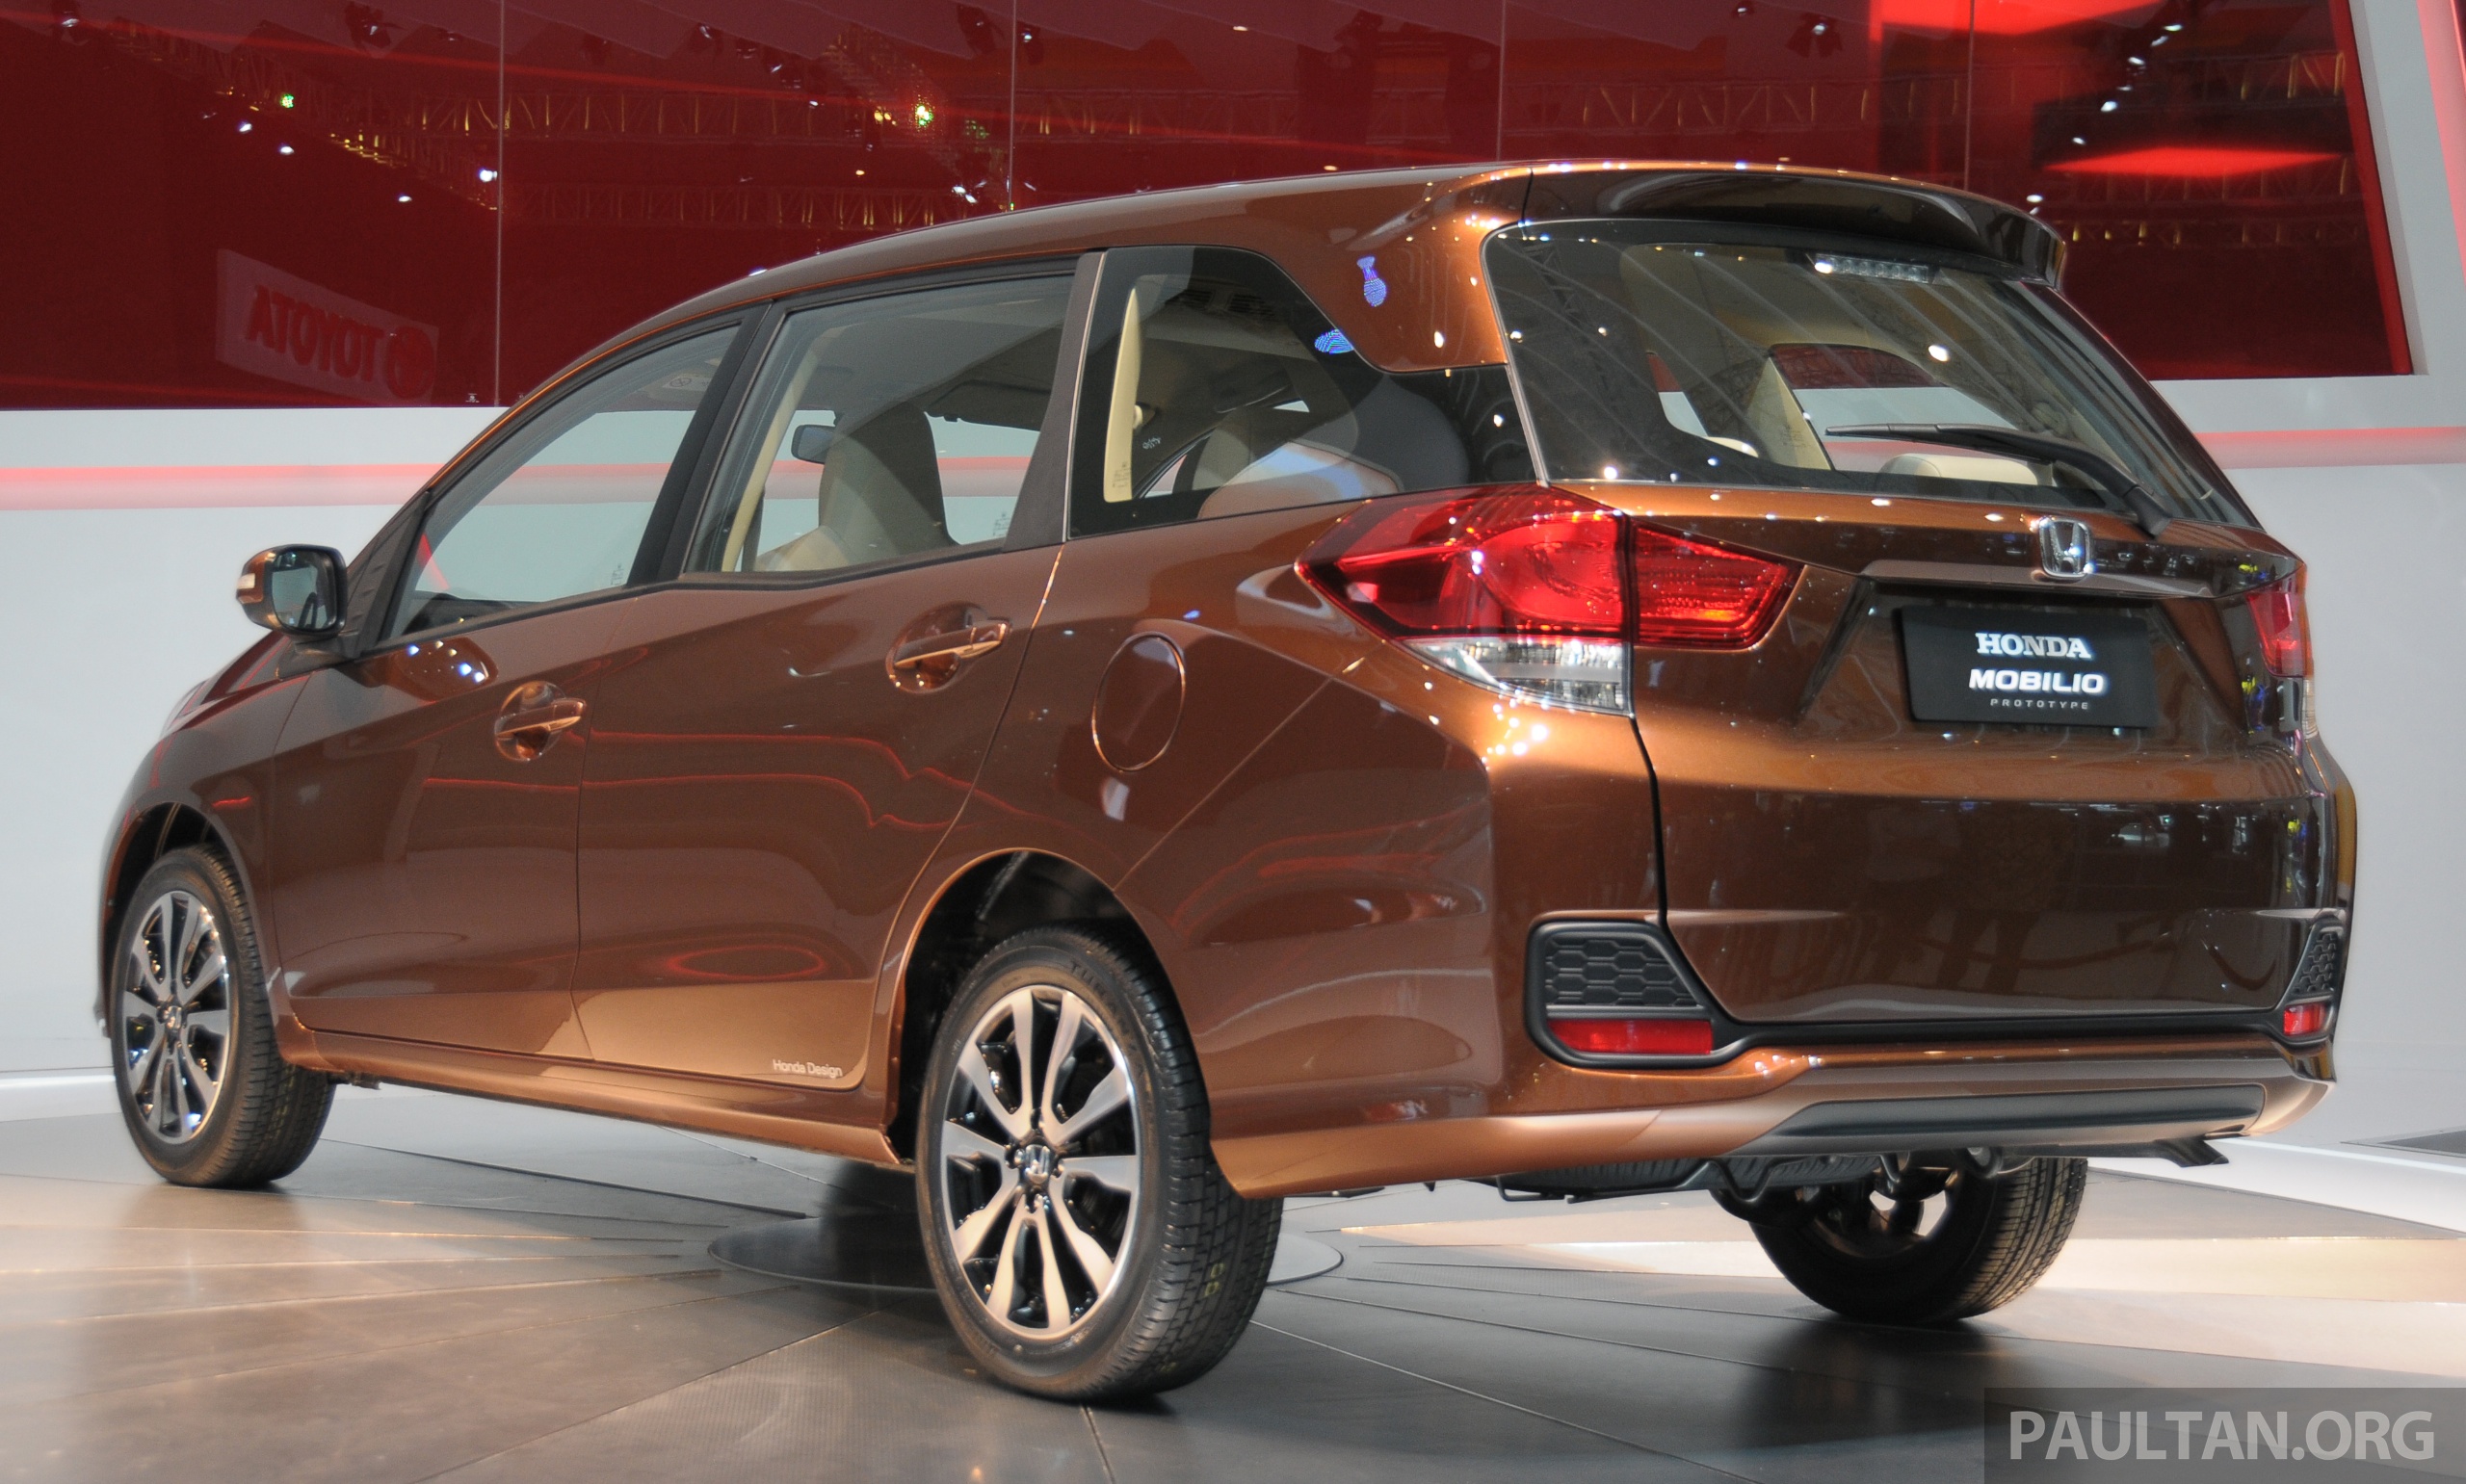  Honda  Mobilio  technical specifications  and fuel economy